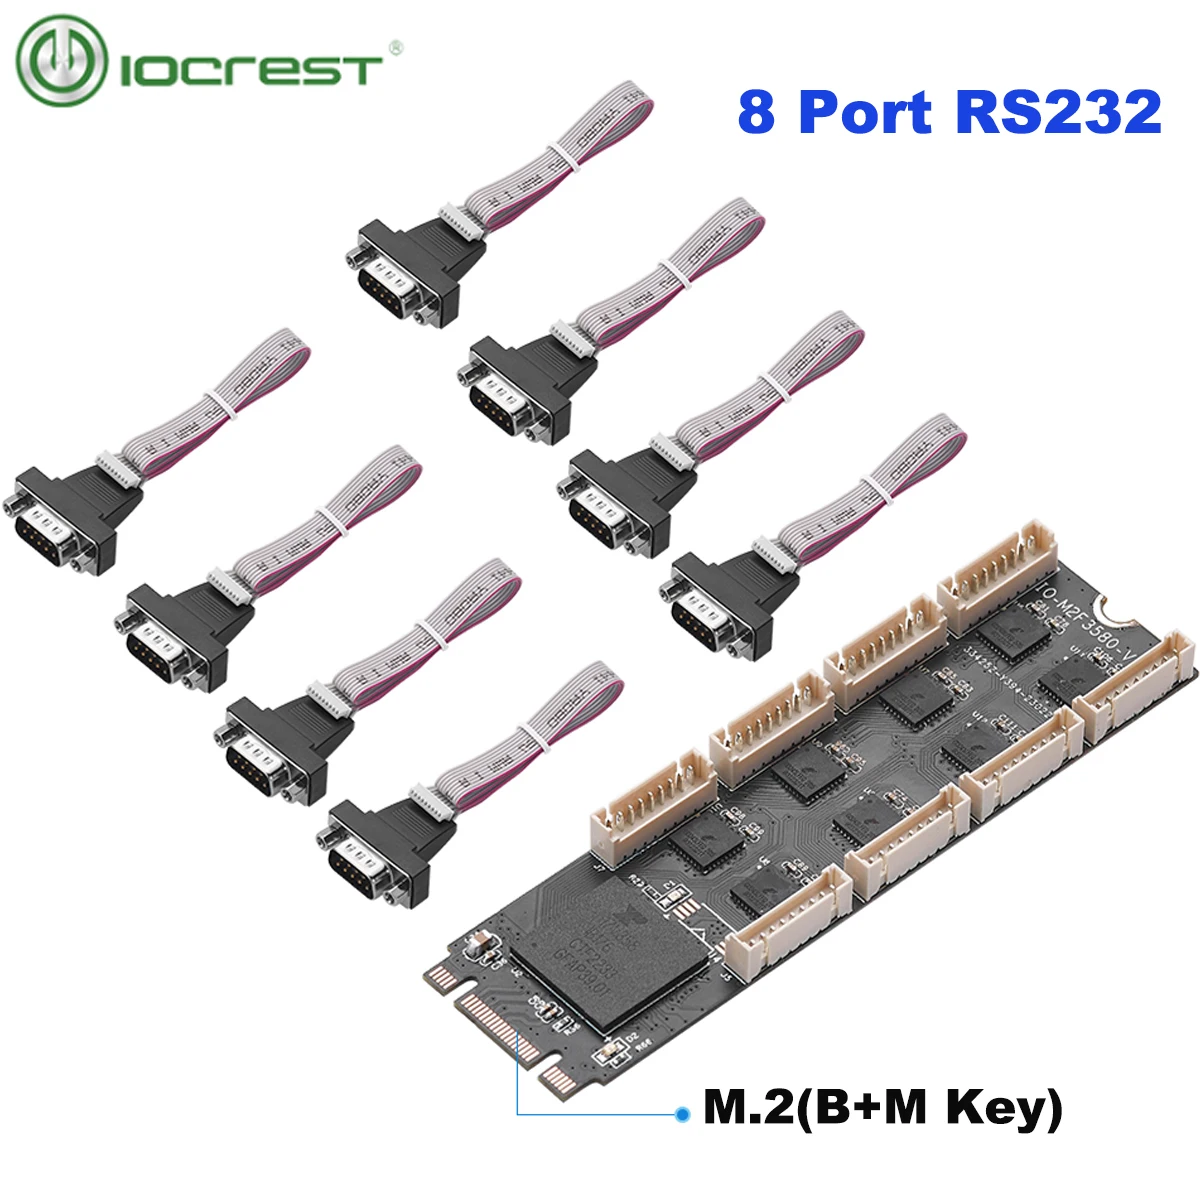 

IOCREST 8 Serial Ports Rs232 Db9 M.2 B Key M key I/O Controller Card M.2 Pcie 2.0 Gen1 2280mm Size Include 8 Db9 Serial Cable